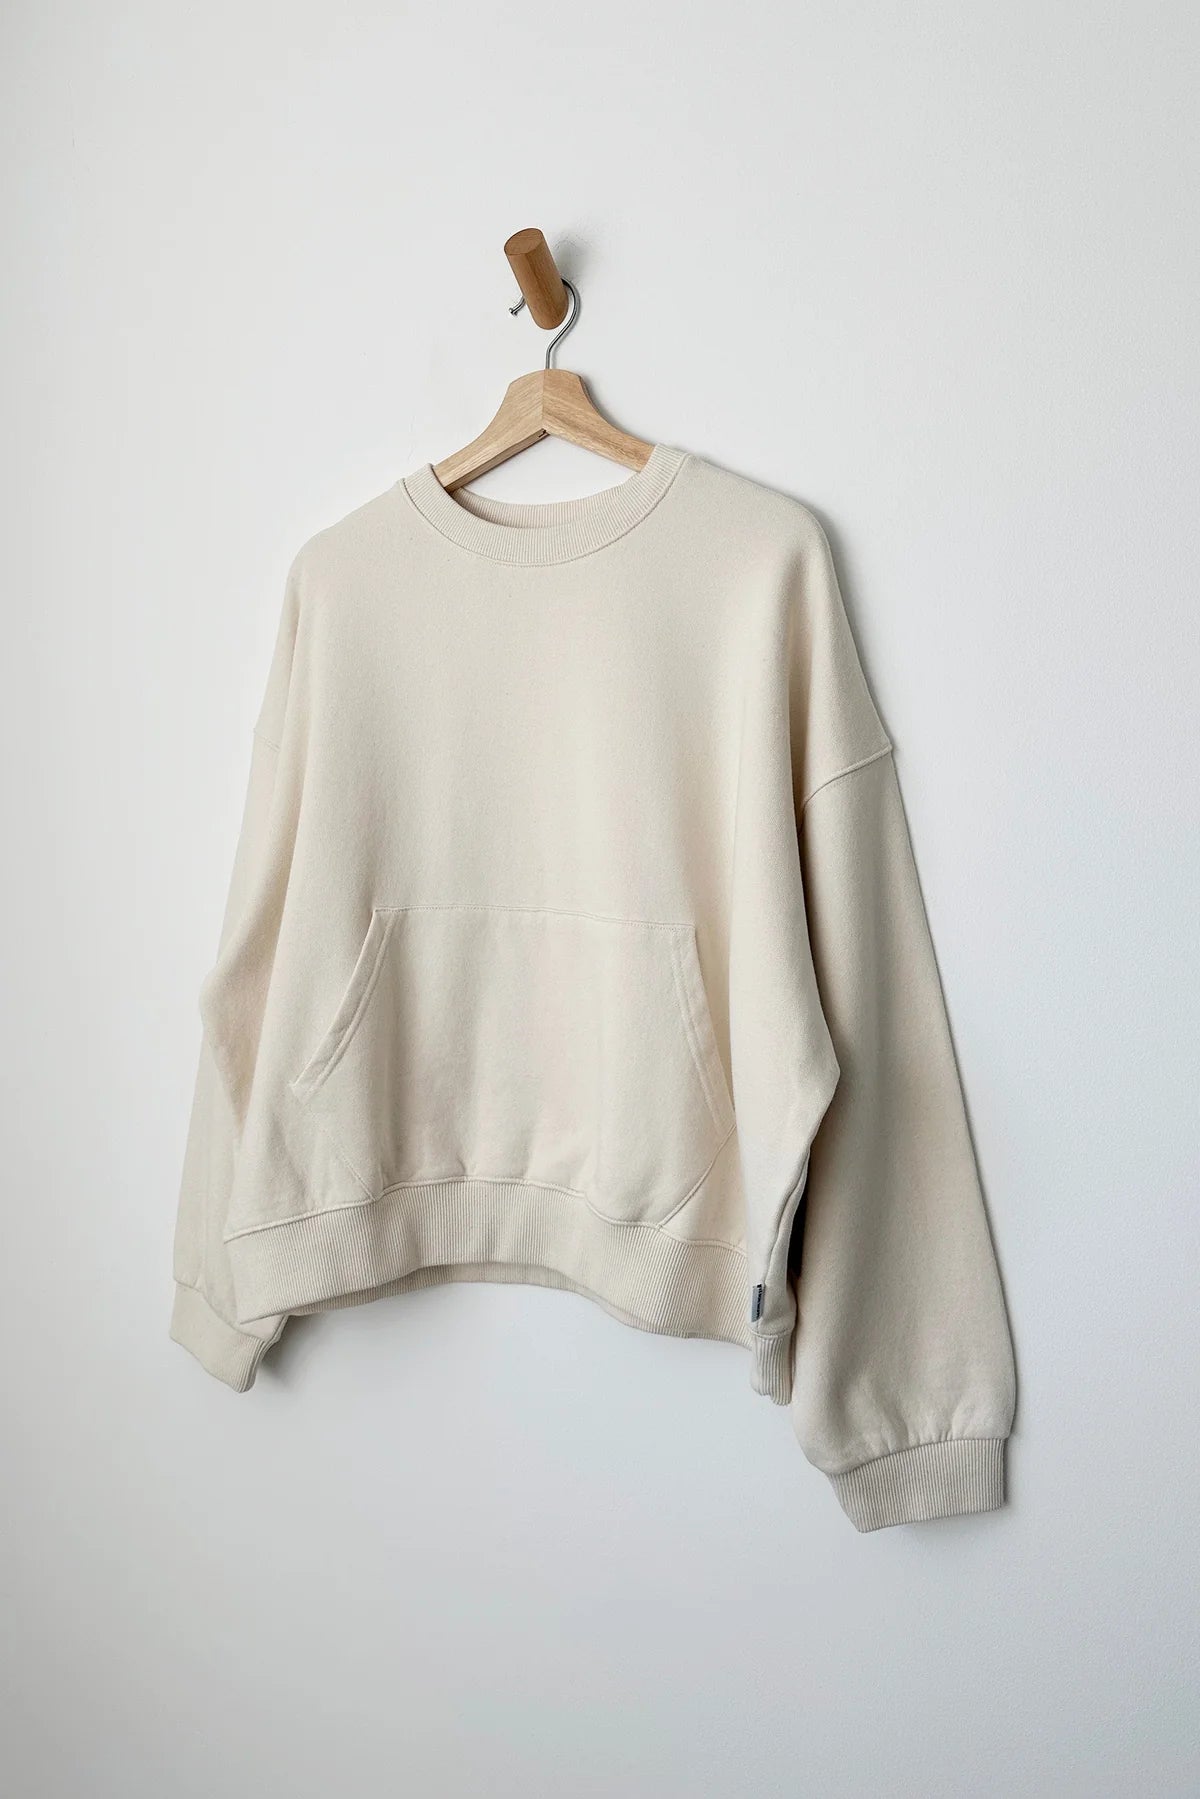 French Terry Poche Top in Natural